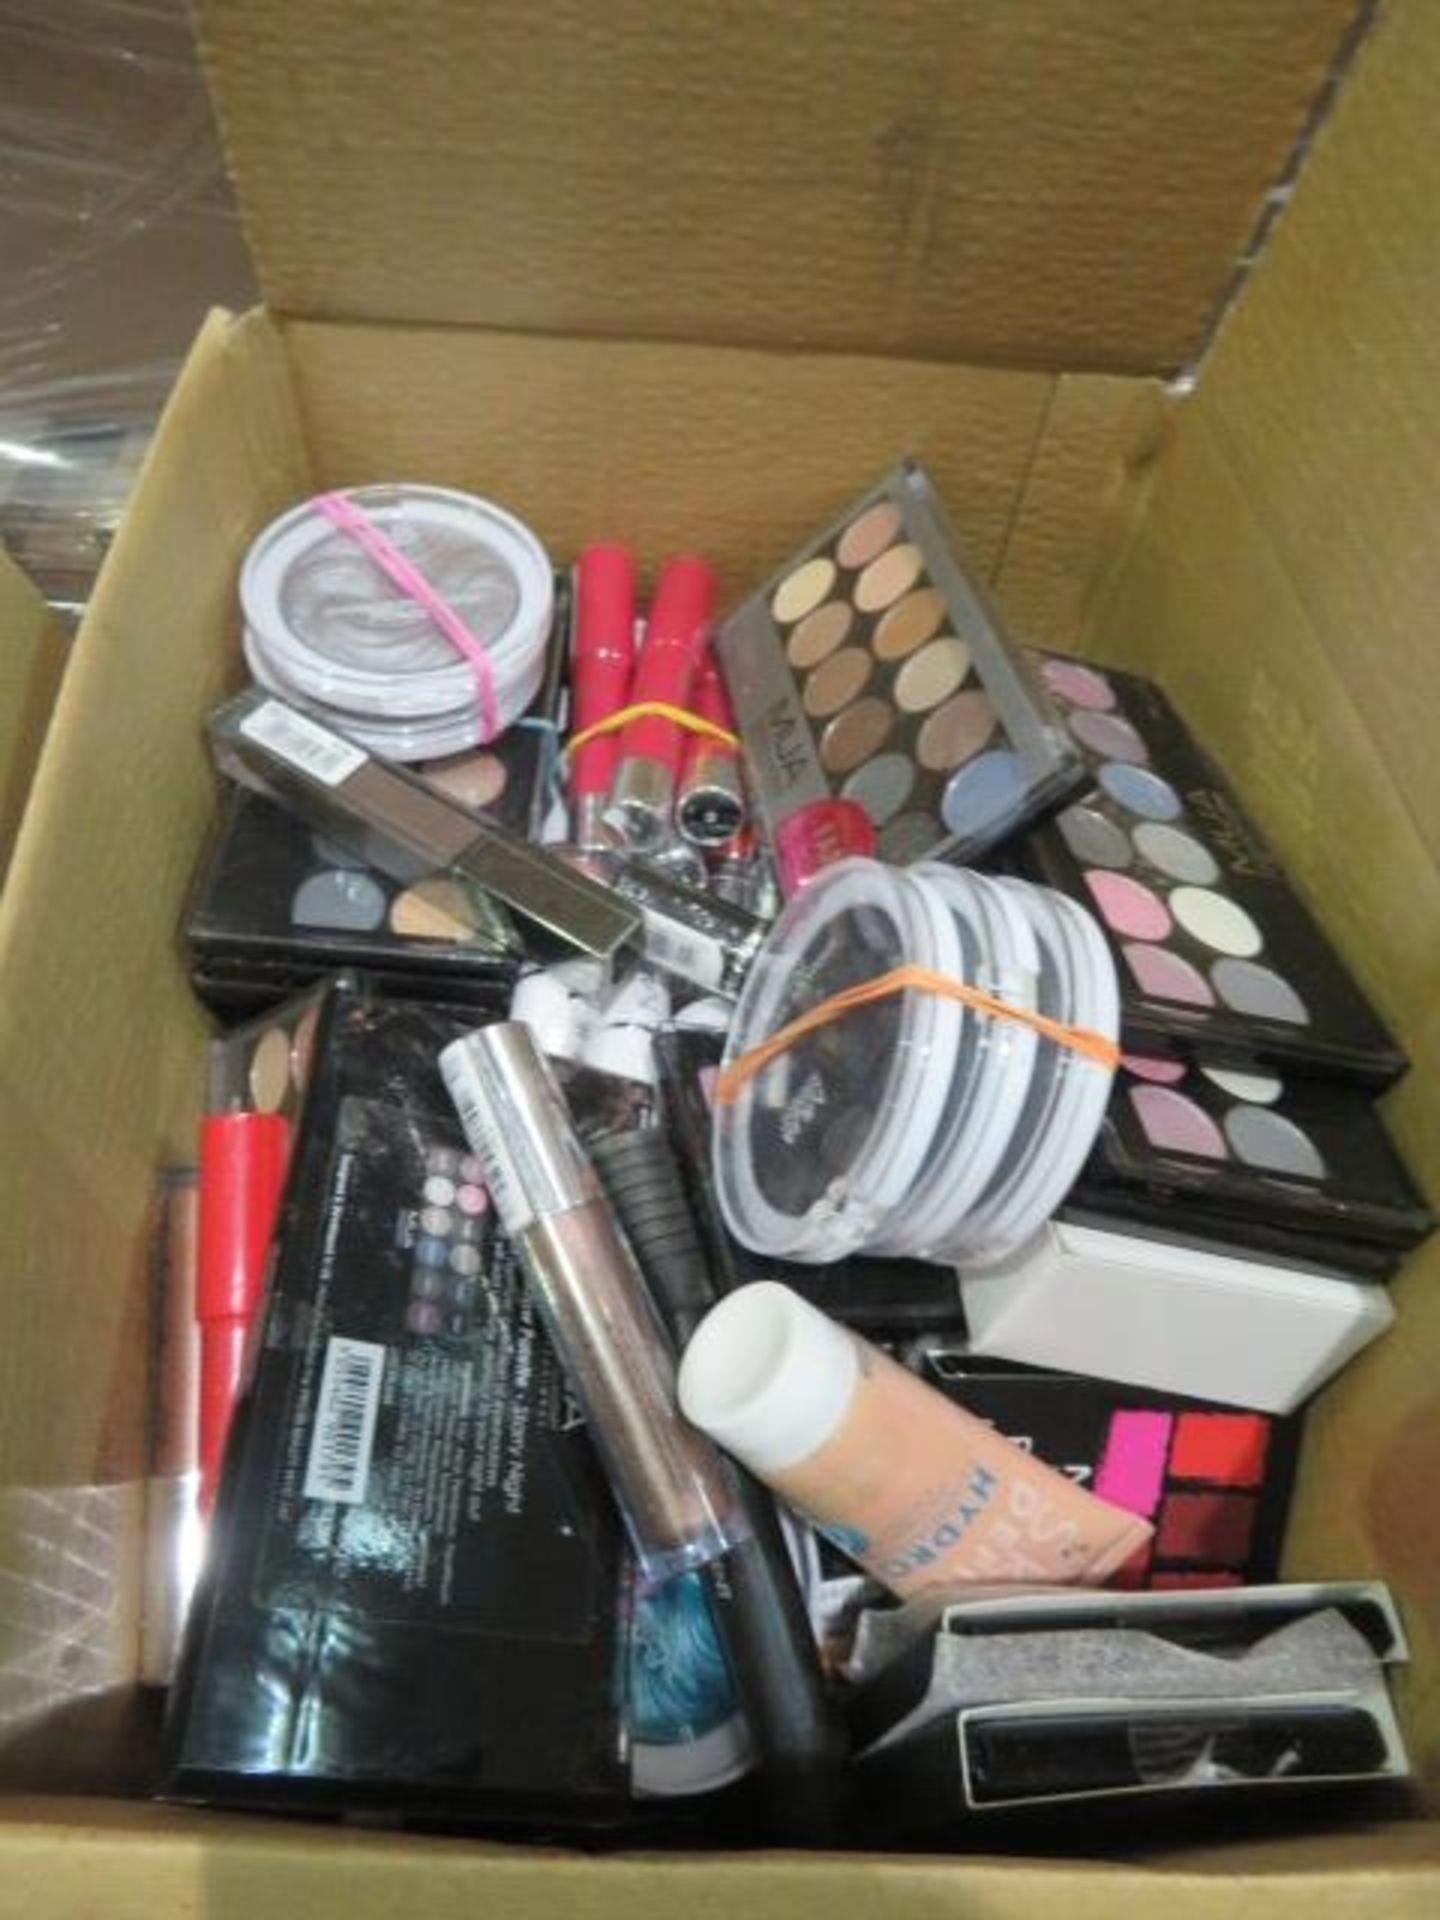 Circa. 200 items of various new make up acadamy make up to include: and much more. UK postage a...